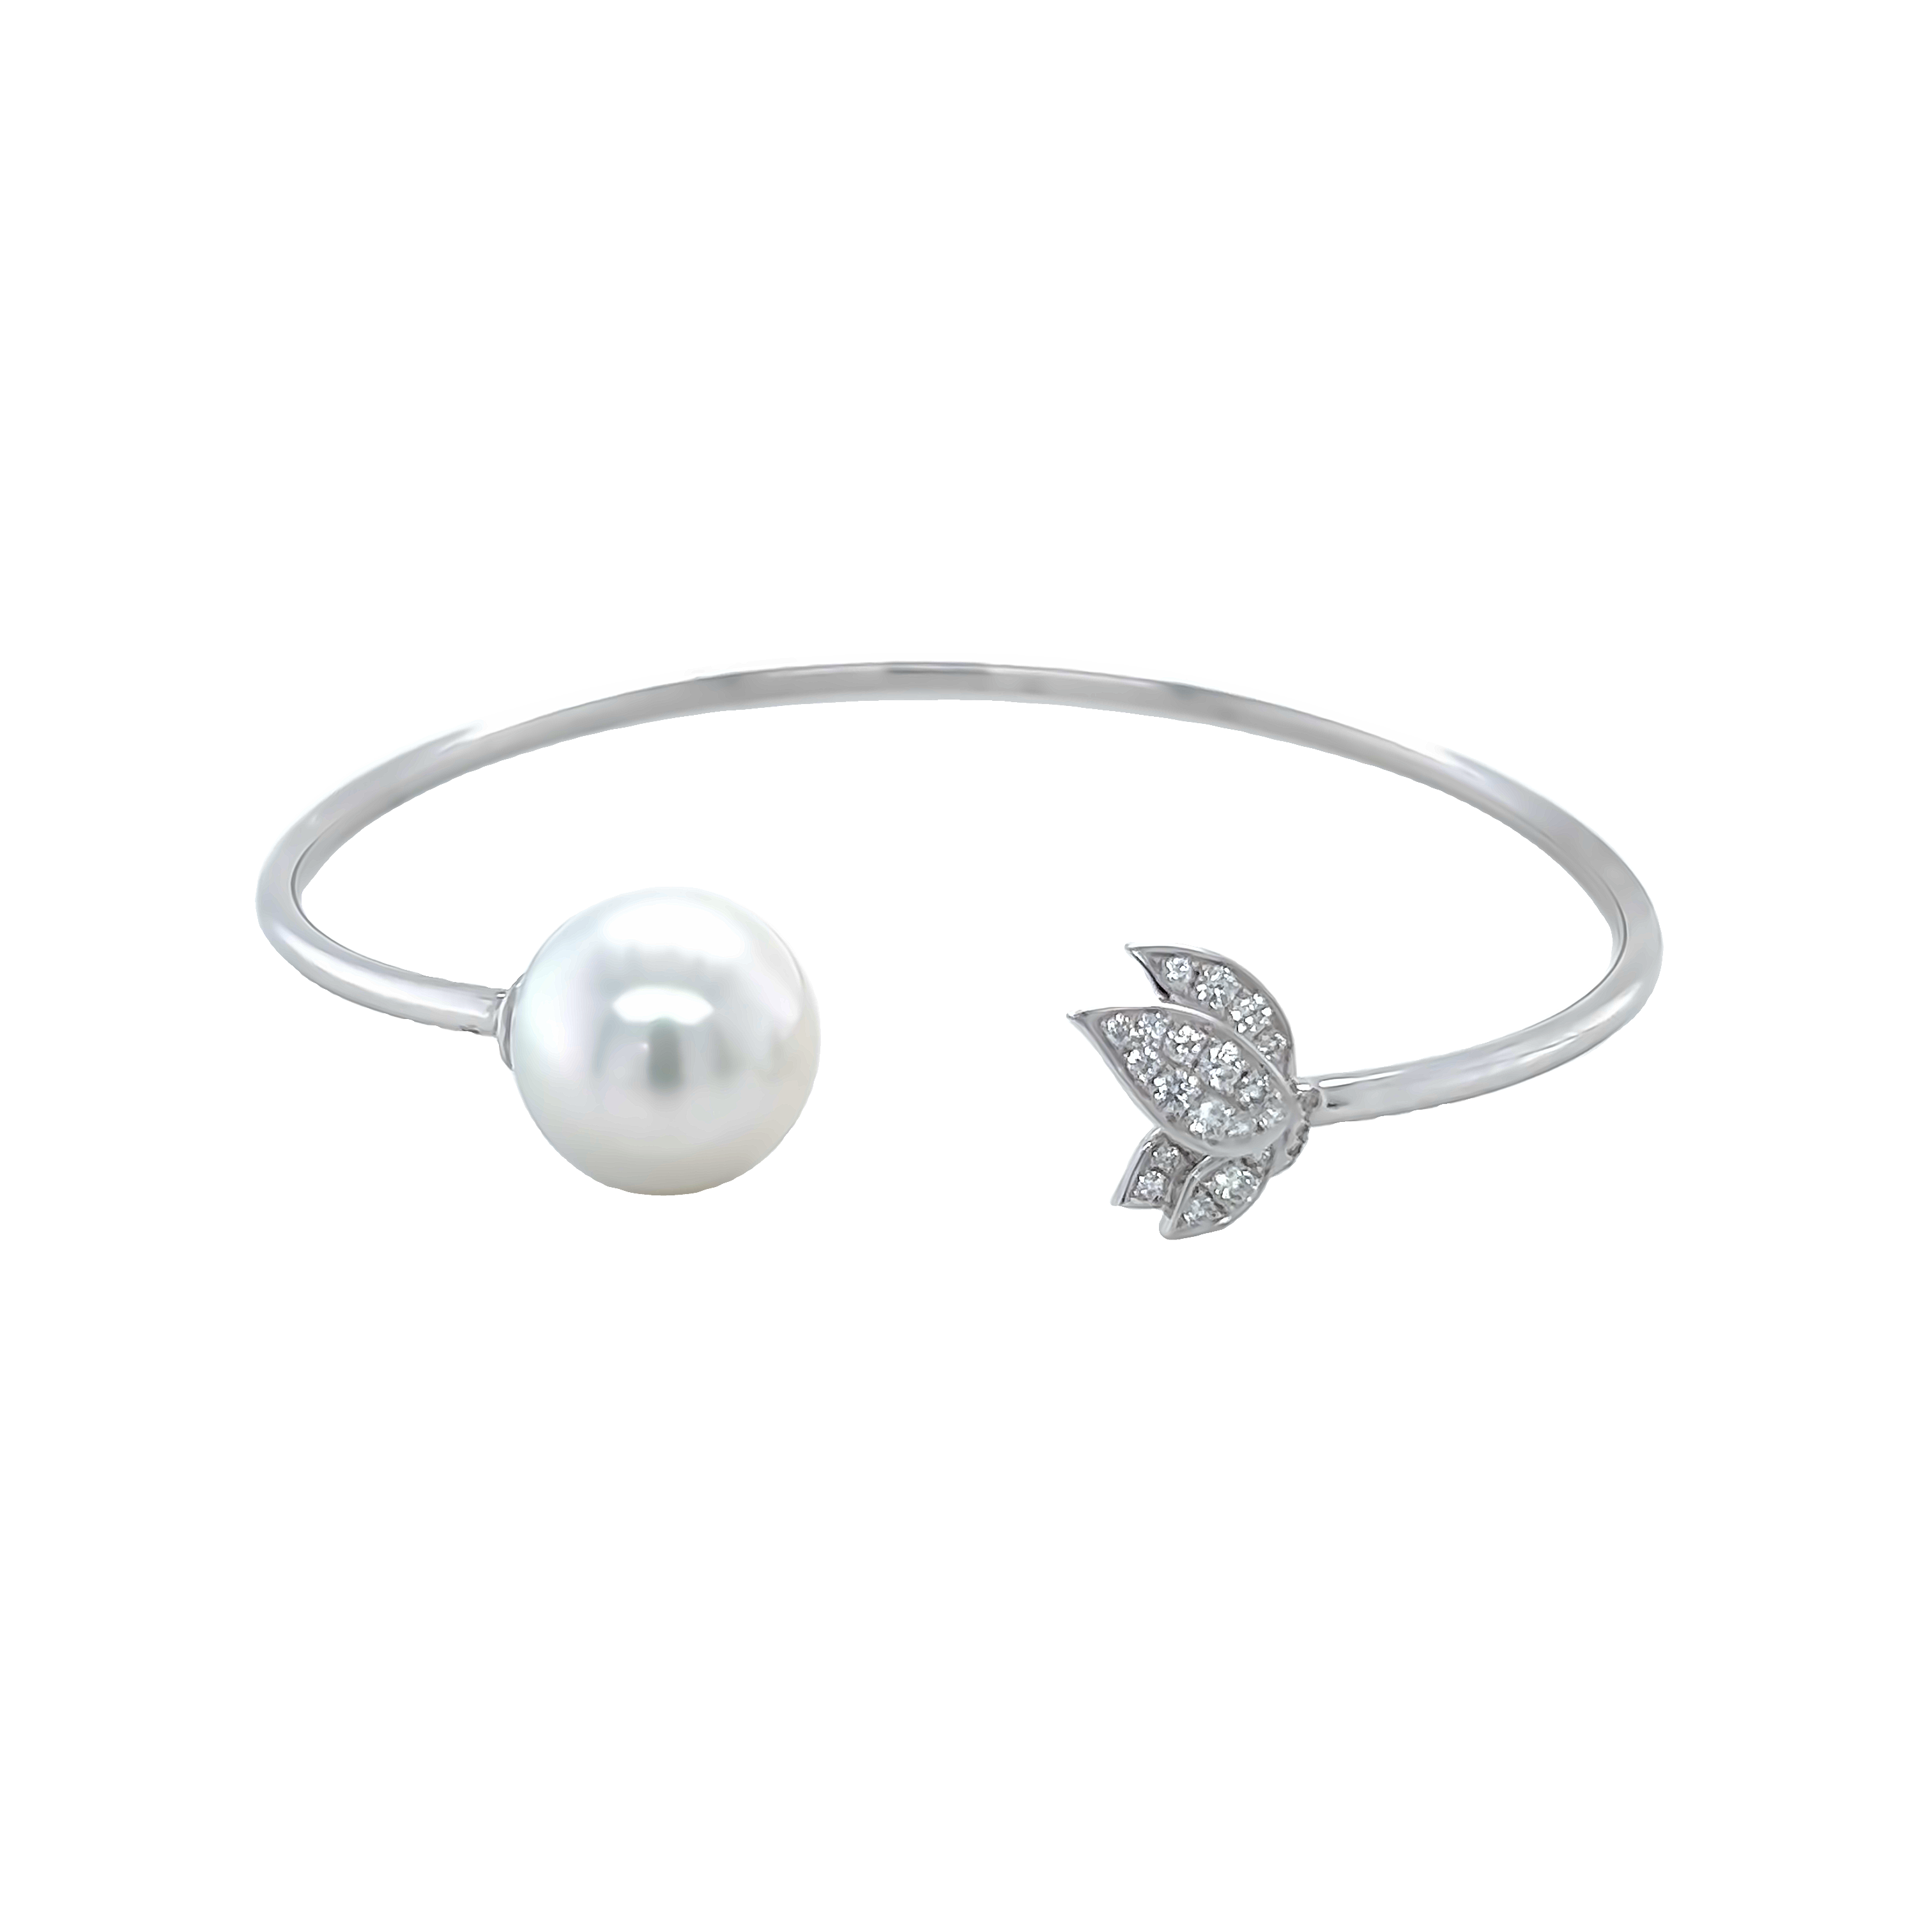 18 Karat white gold bangle with One 11.00mm South Sea Pearl and 23=0.22 total weight Round Brilliant G Vs Diamonds